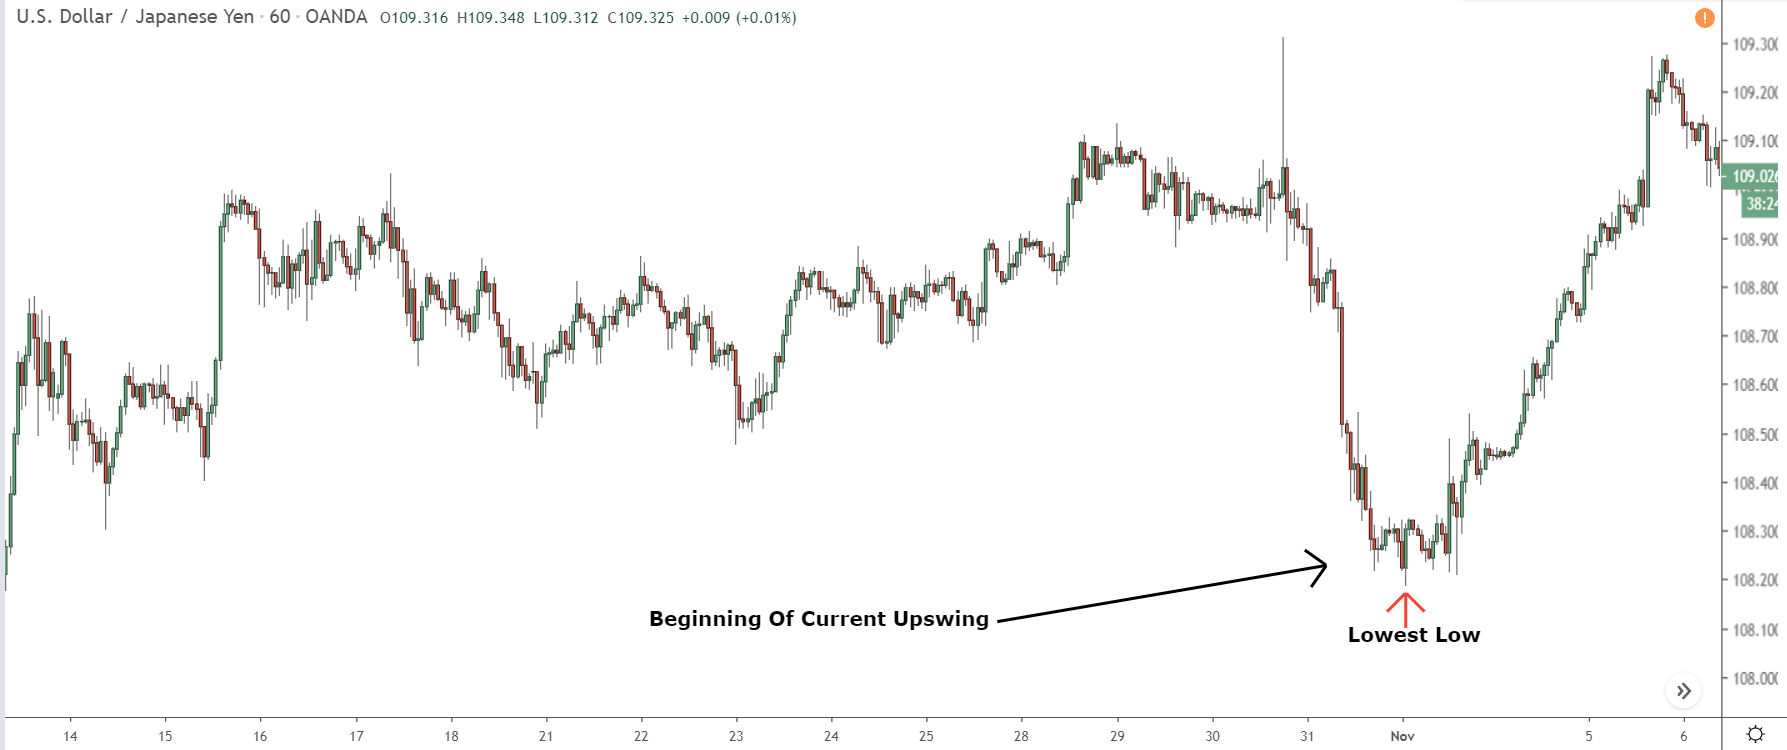 lowest low at beginning of upswing 